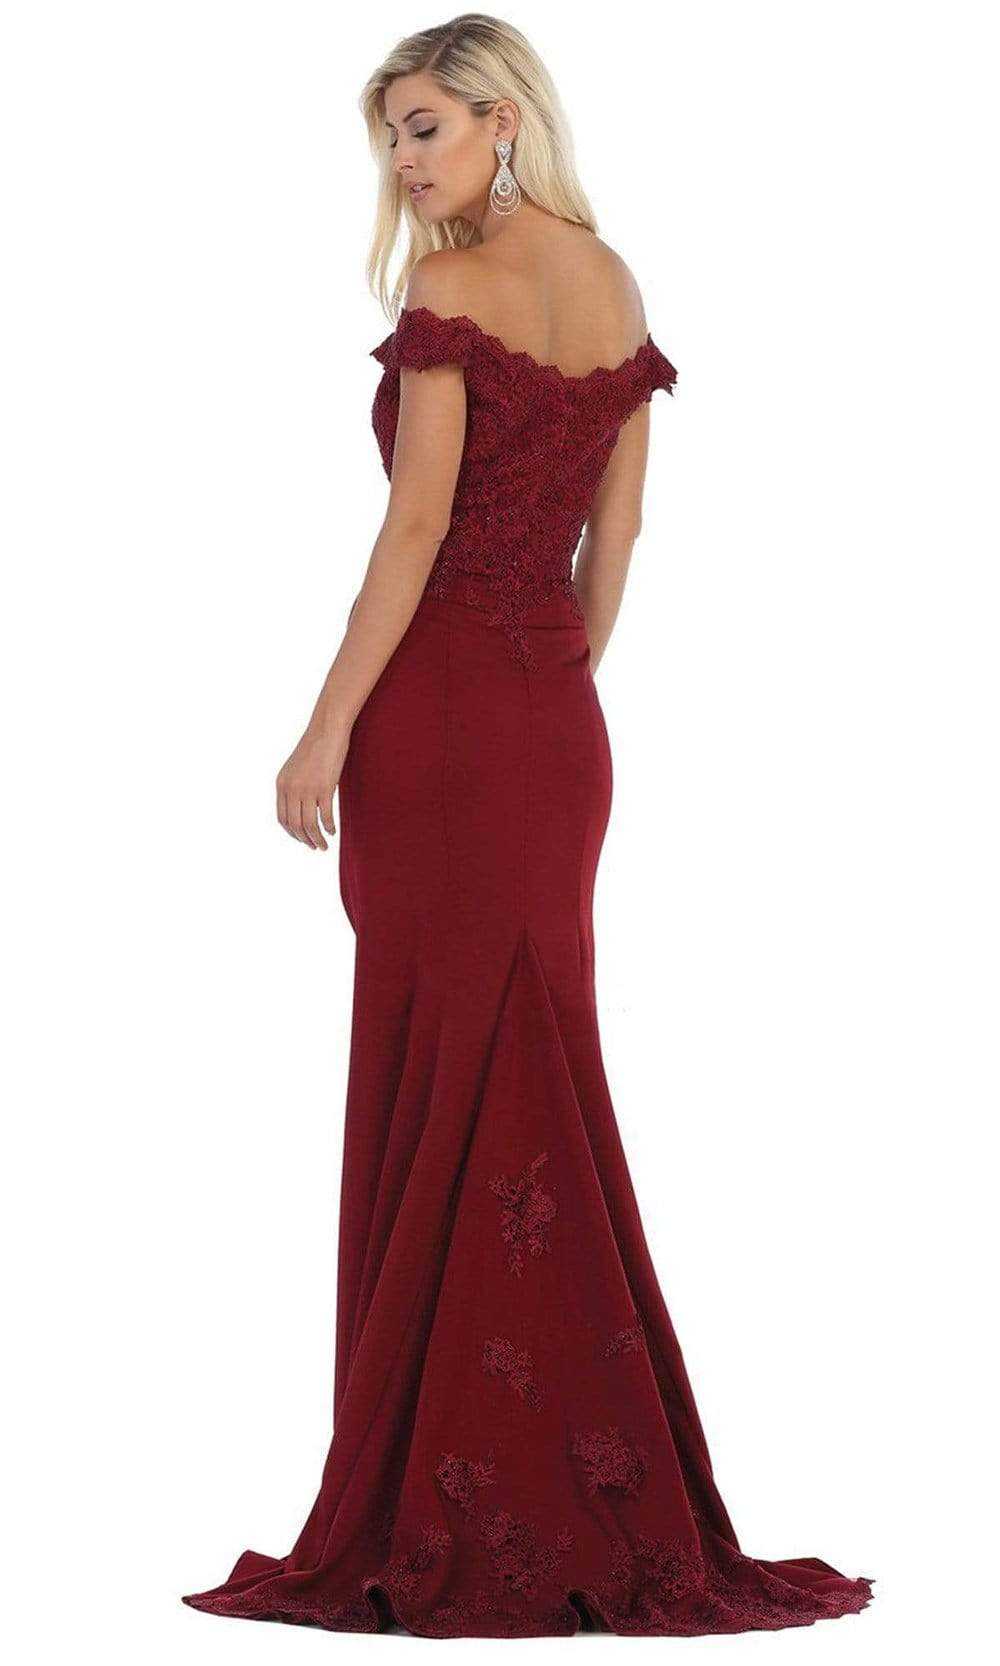 May Queen, May Queen - Scalloped Off-Shoulder Trumpet Dress MQ1675